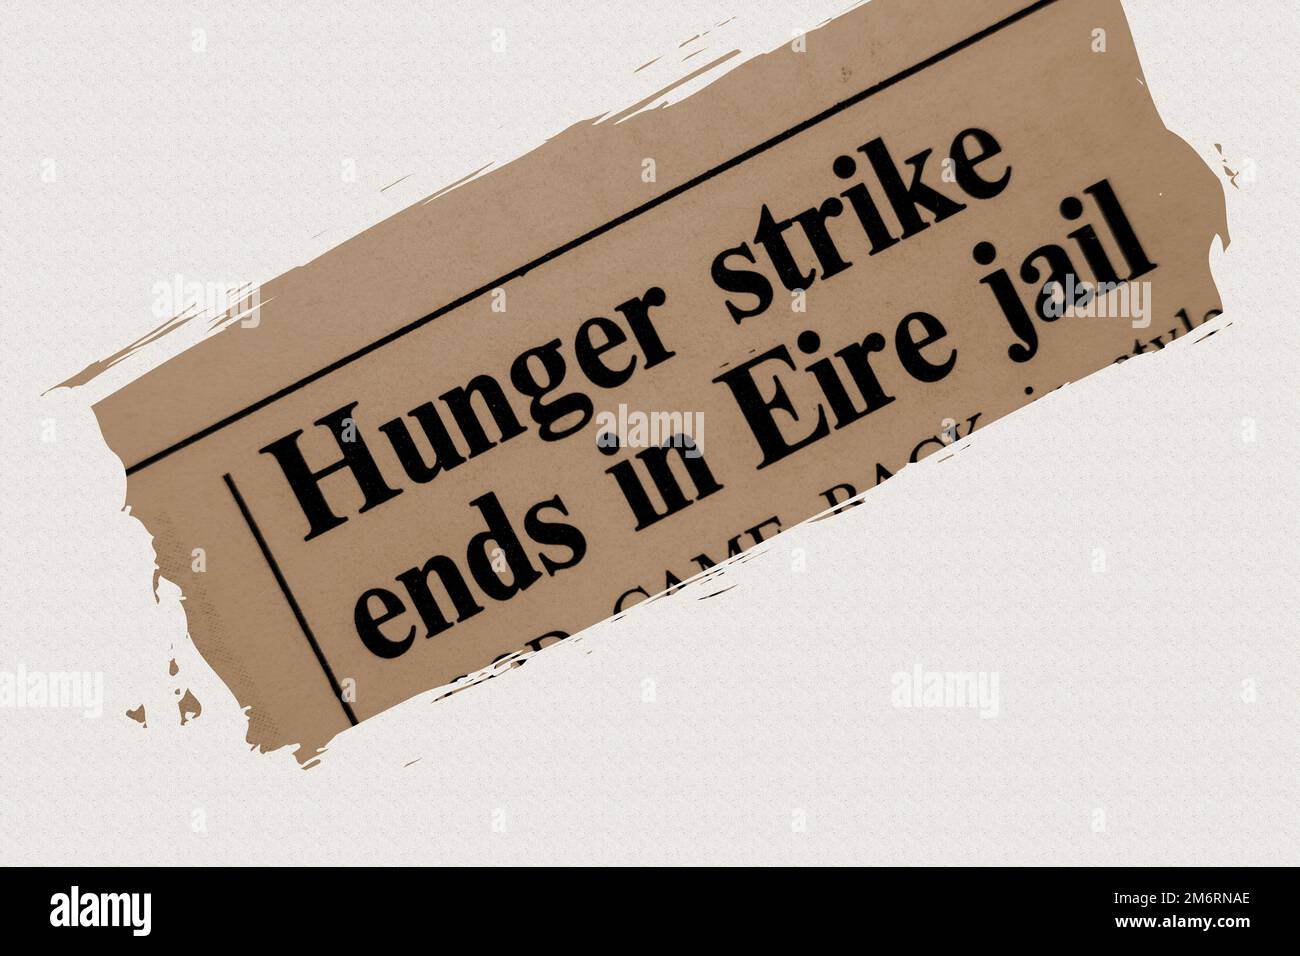 Hunger strike ends in Eire jail - news story from 1975 newspaper headline article title with overlay in sepia Stock Photo